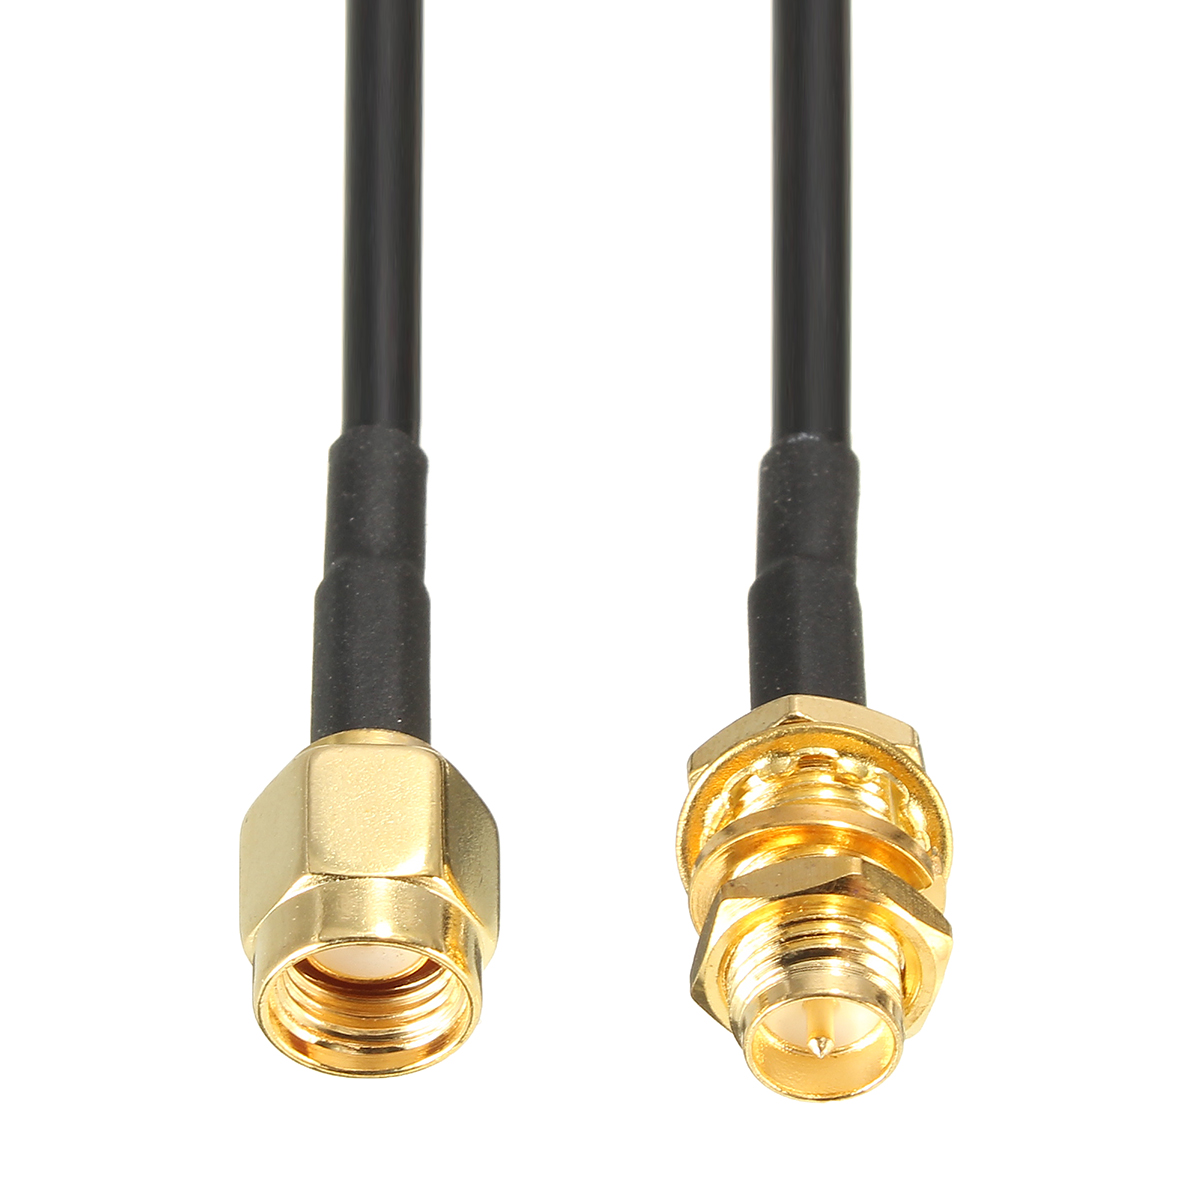 20CM/ 1M/ 5M/ 10M RP-SMA Male to Female Wireless Antenna Extension Cable 18